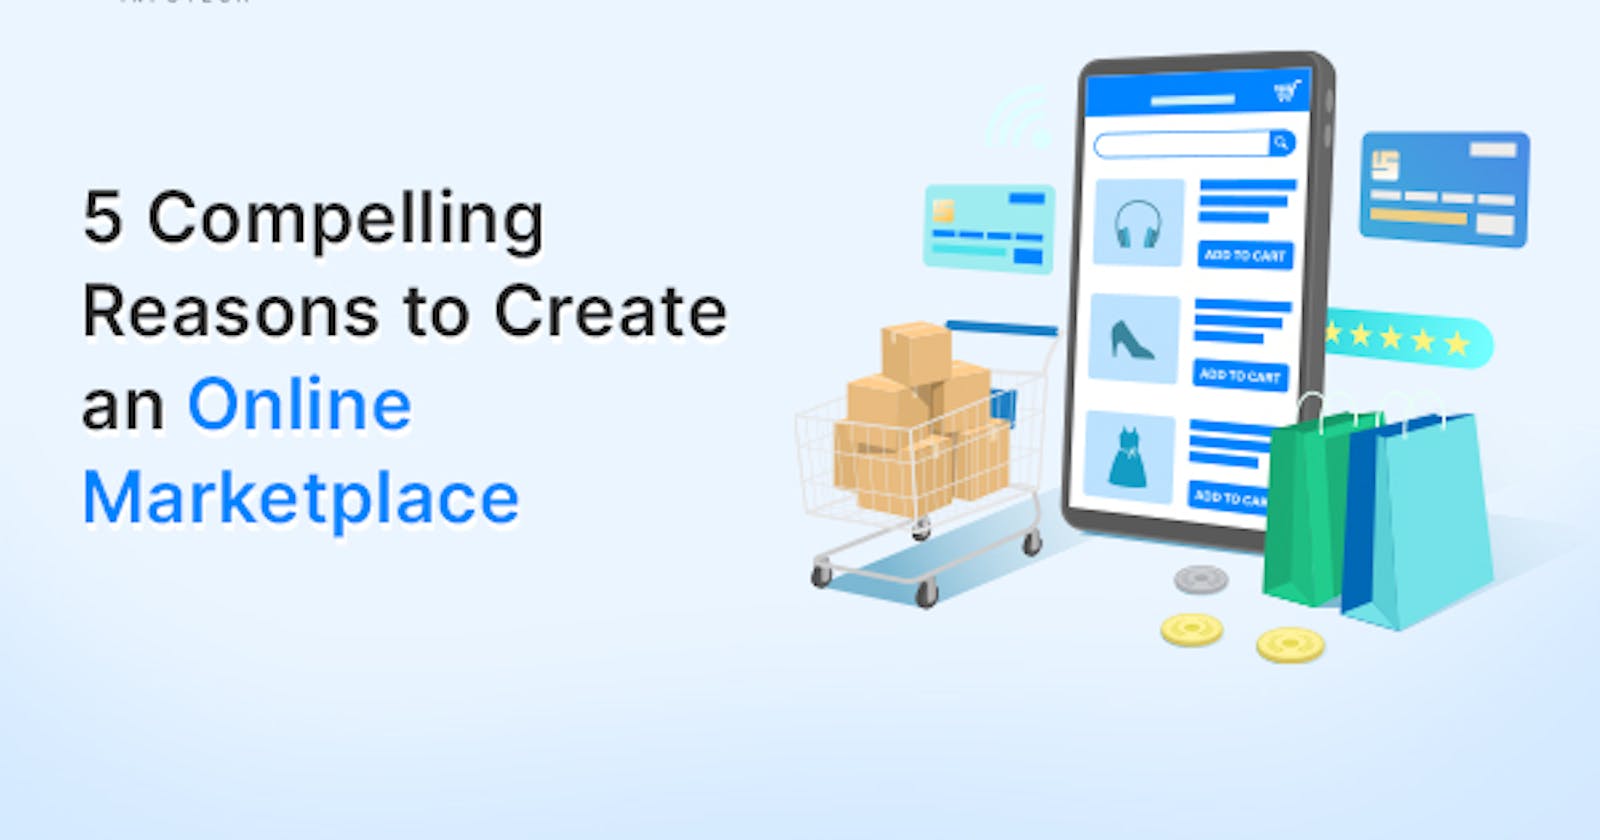 5 Compelling Reasons to Create an Online Marketplace